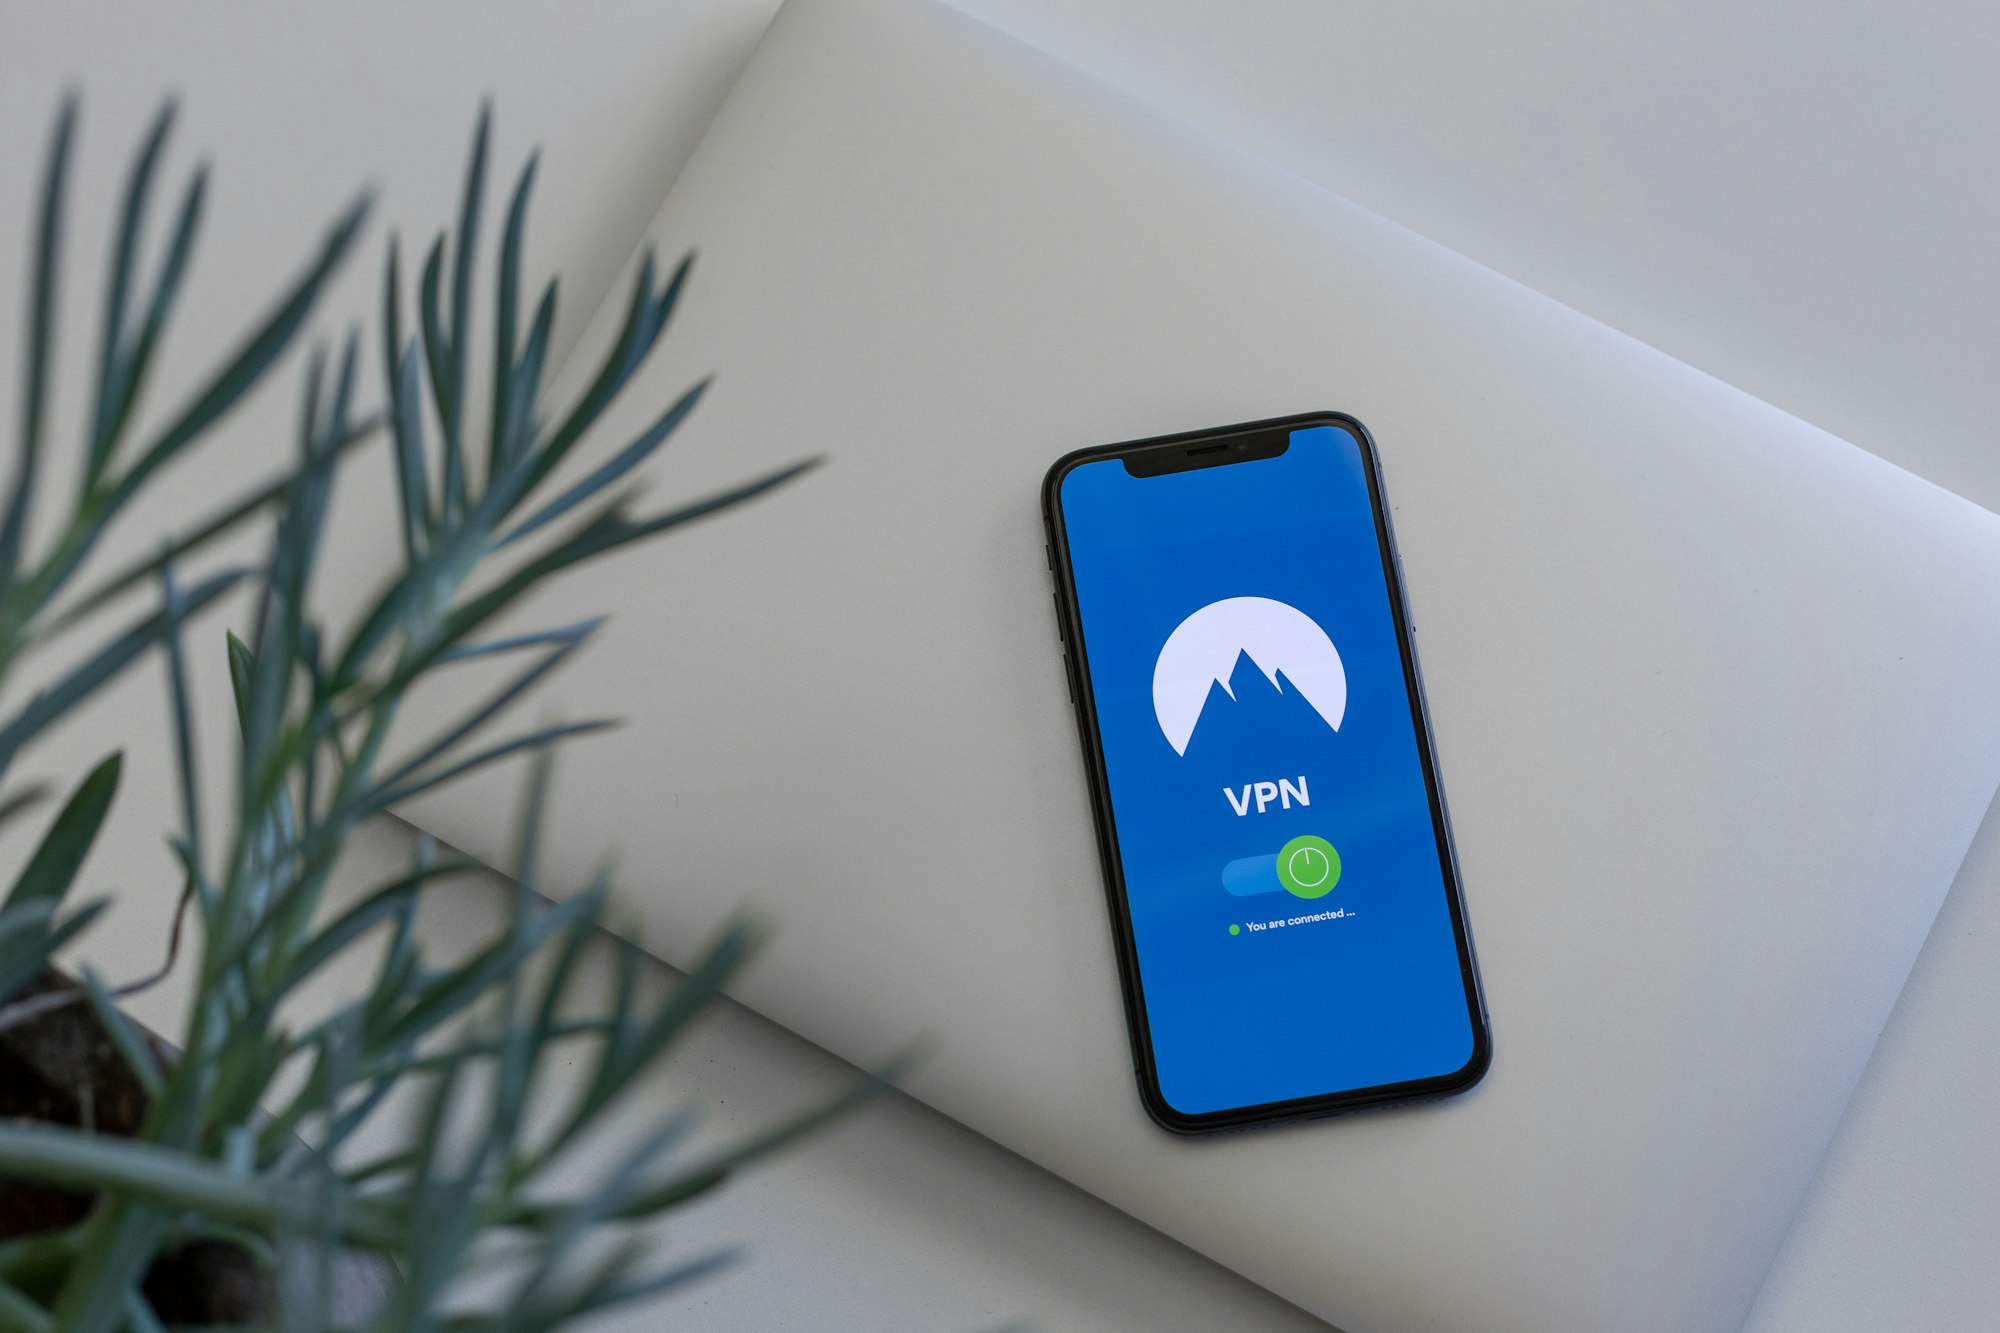 How to Use NordVPN on your iPhone